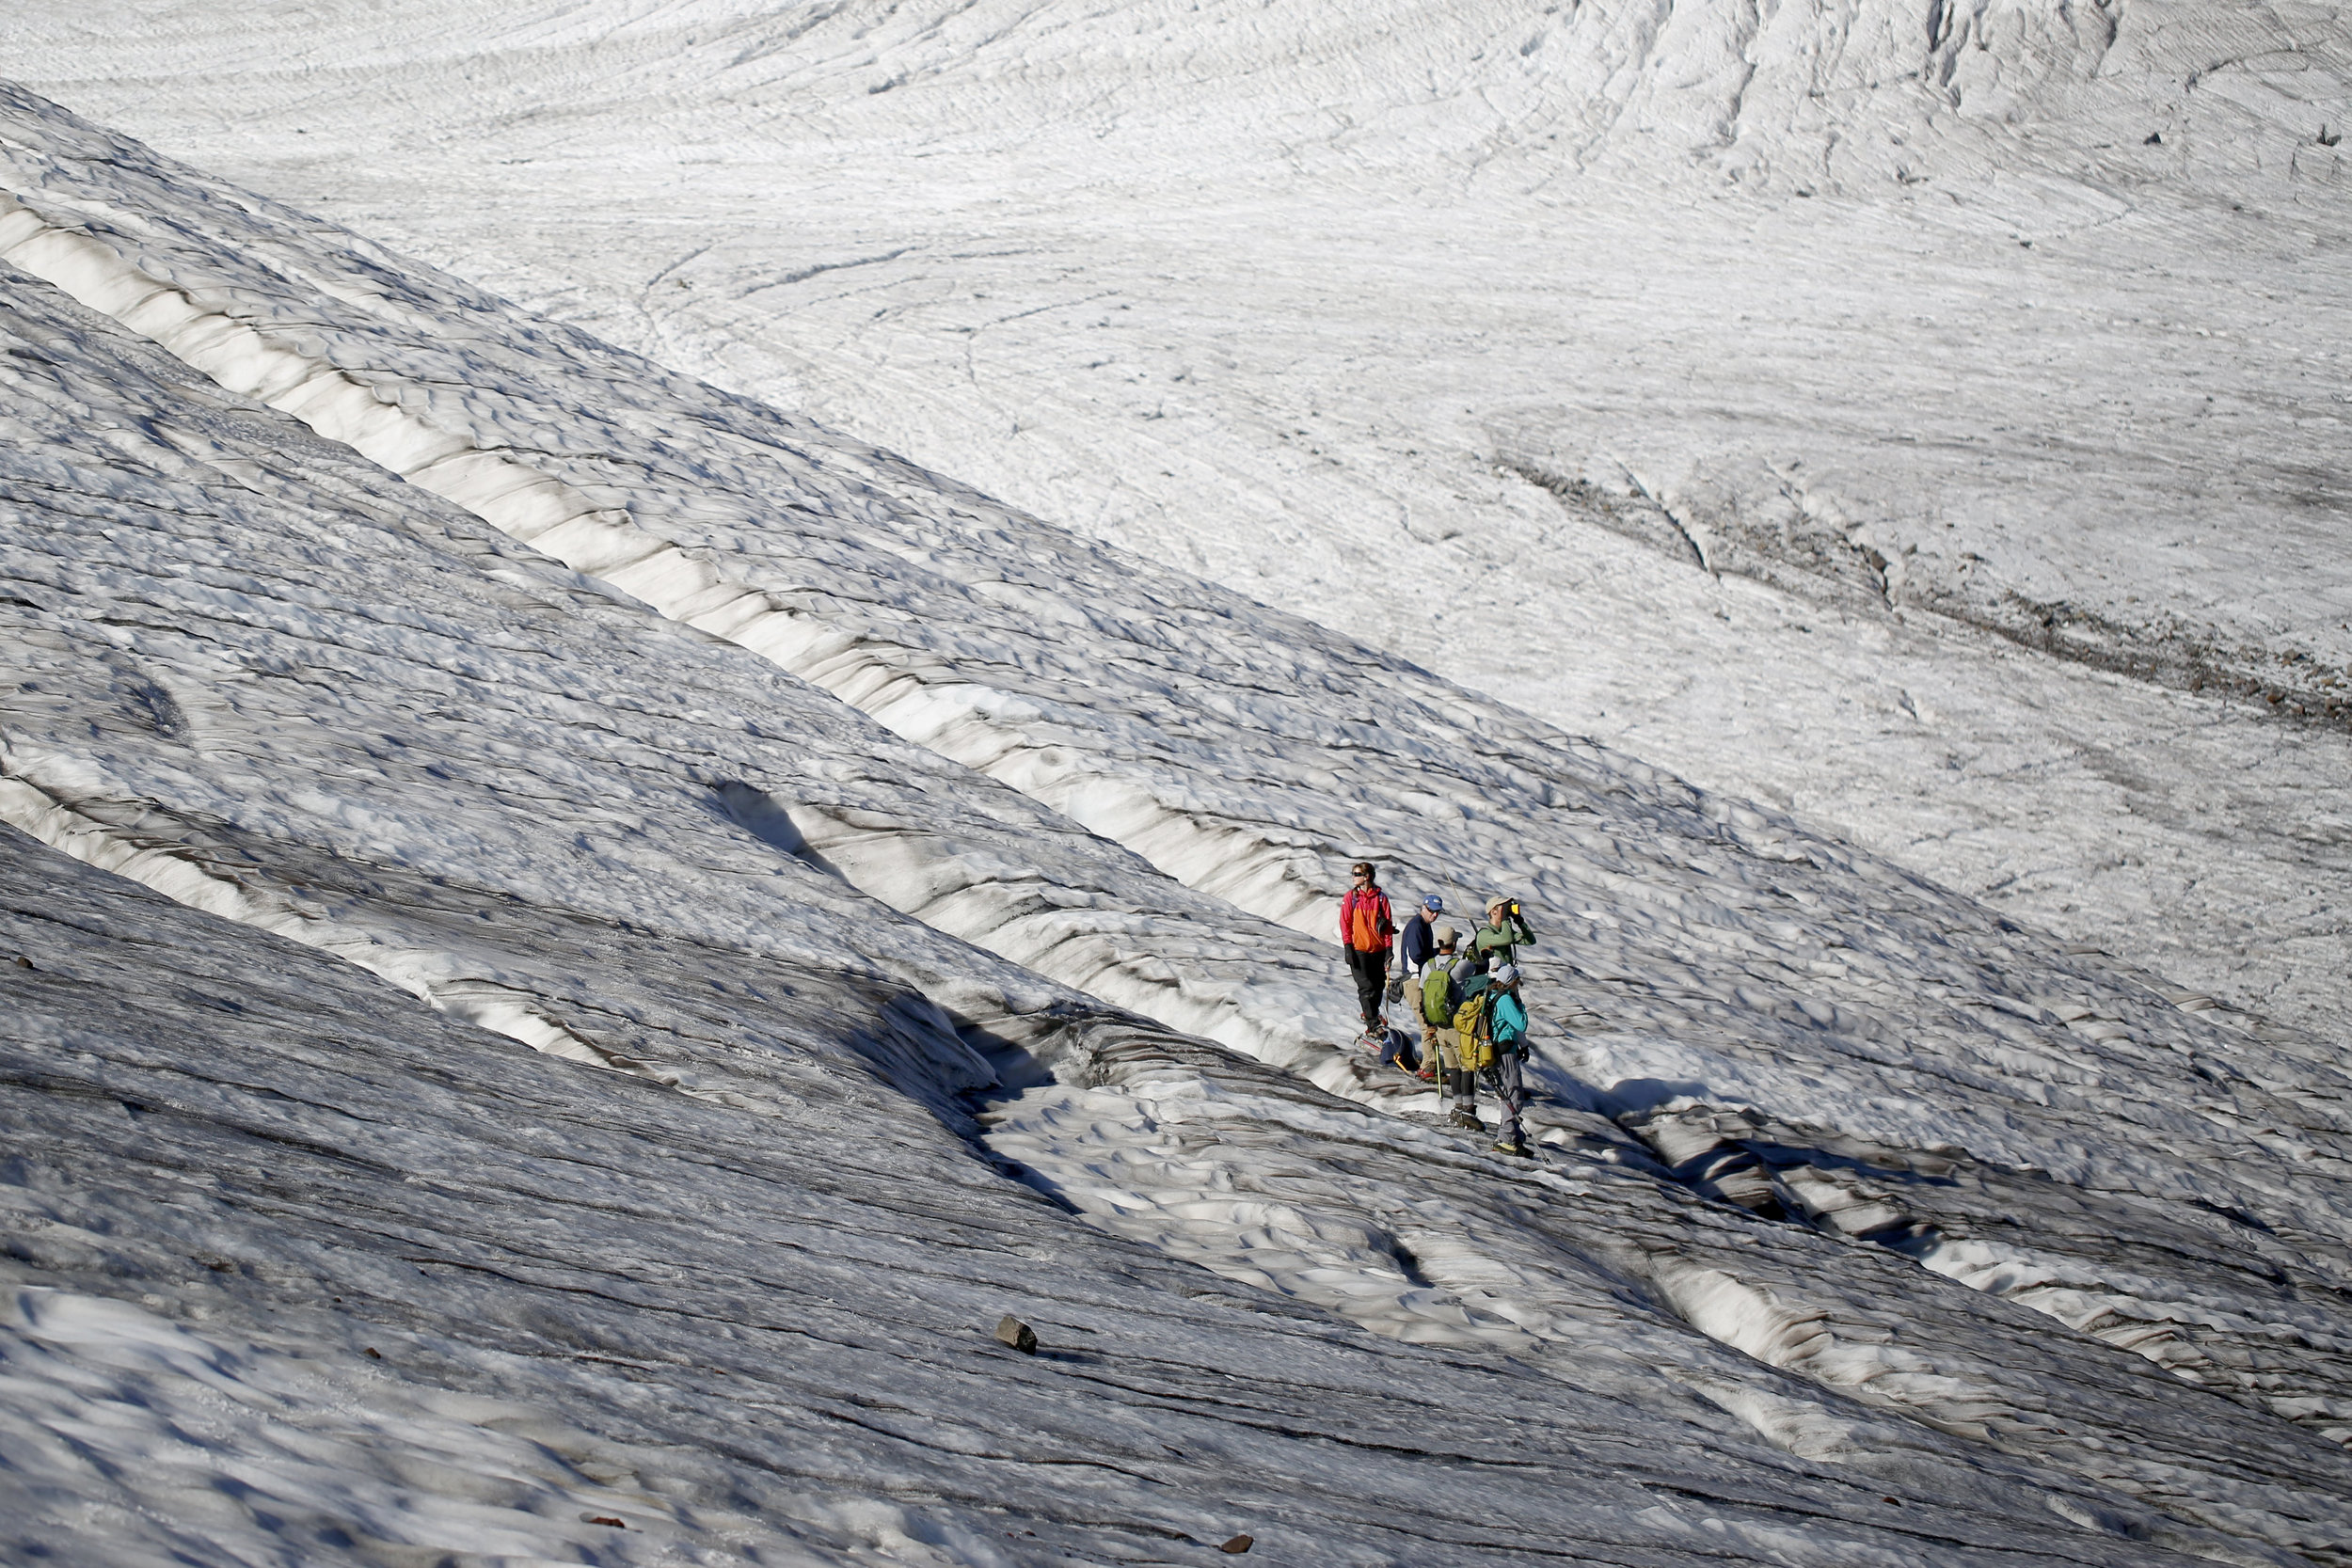  The team of researchers, led by glaciologist Mauri Pelto, travels across Sholes Glacier on Friday, Aug. 7, 2015.  